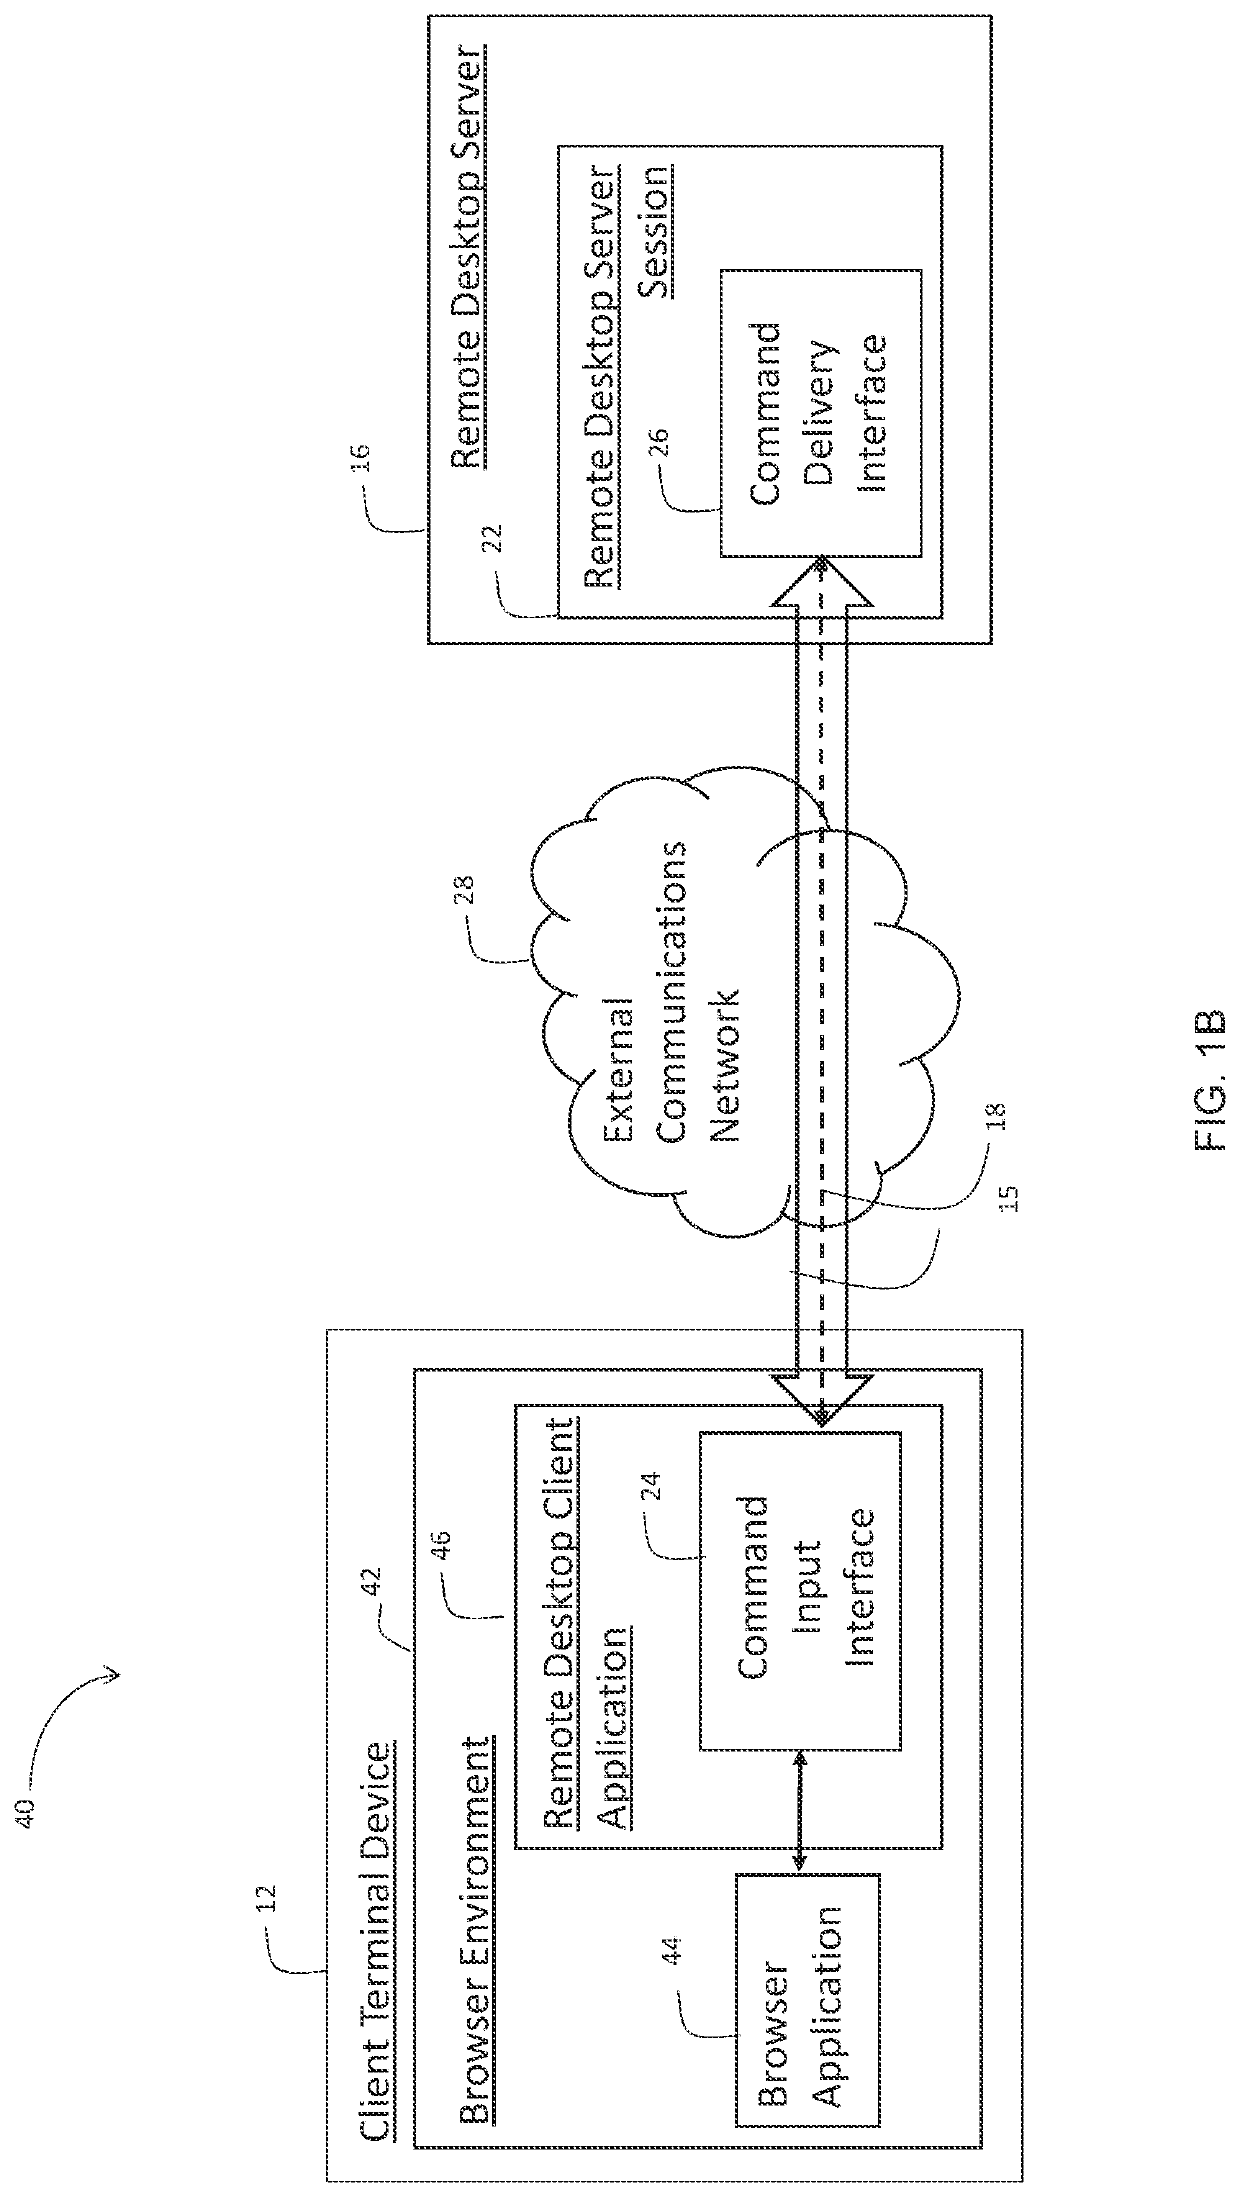 System and method for automated process orchestration